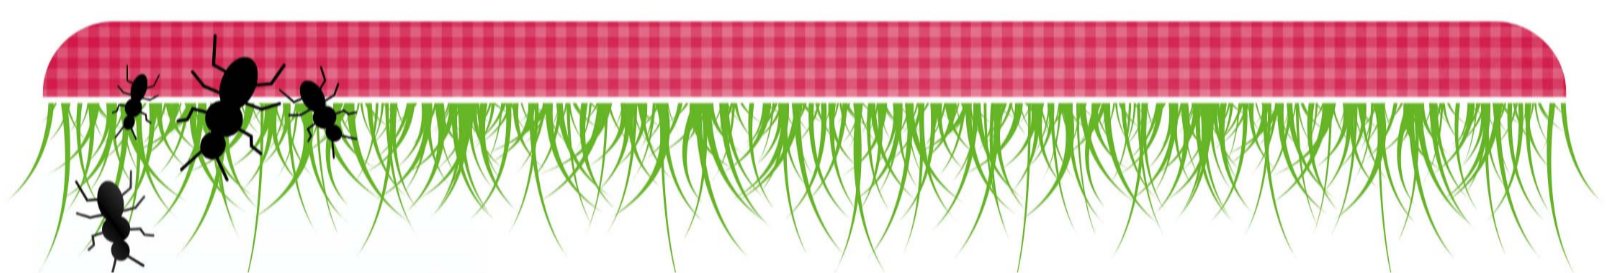 Grass, picnic tablecloth, and ants